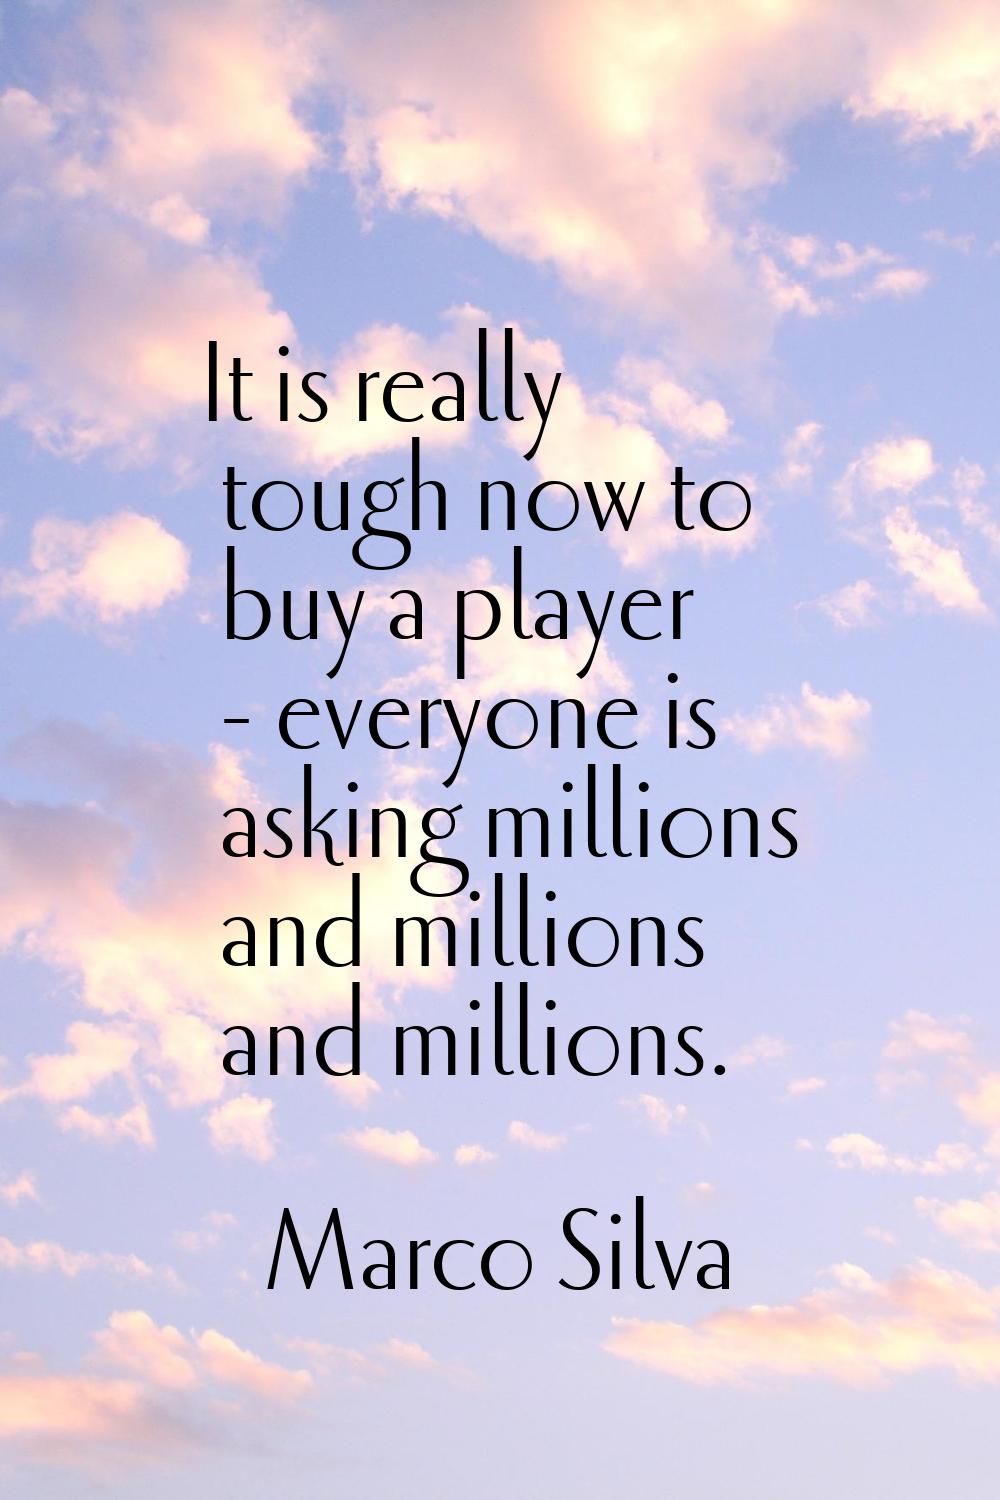 It is really tough now to buy a player - everyone is asking millions and millions and millions.